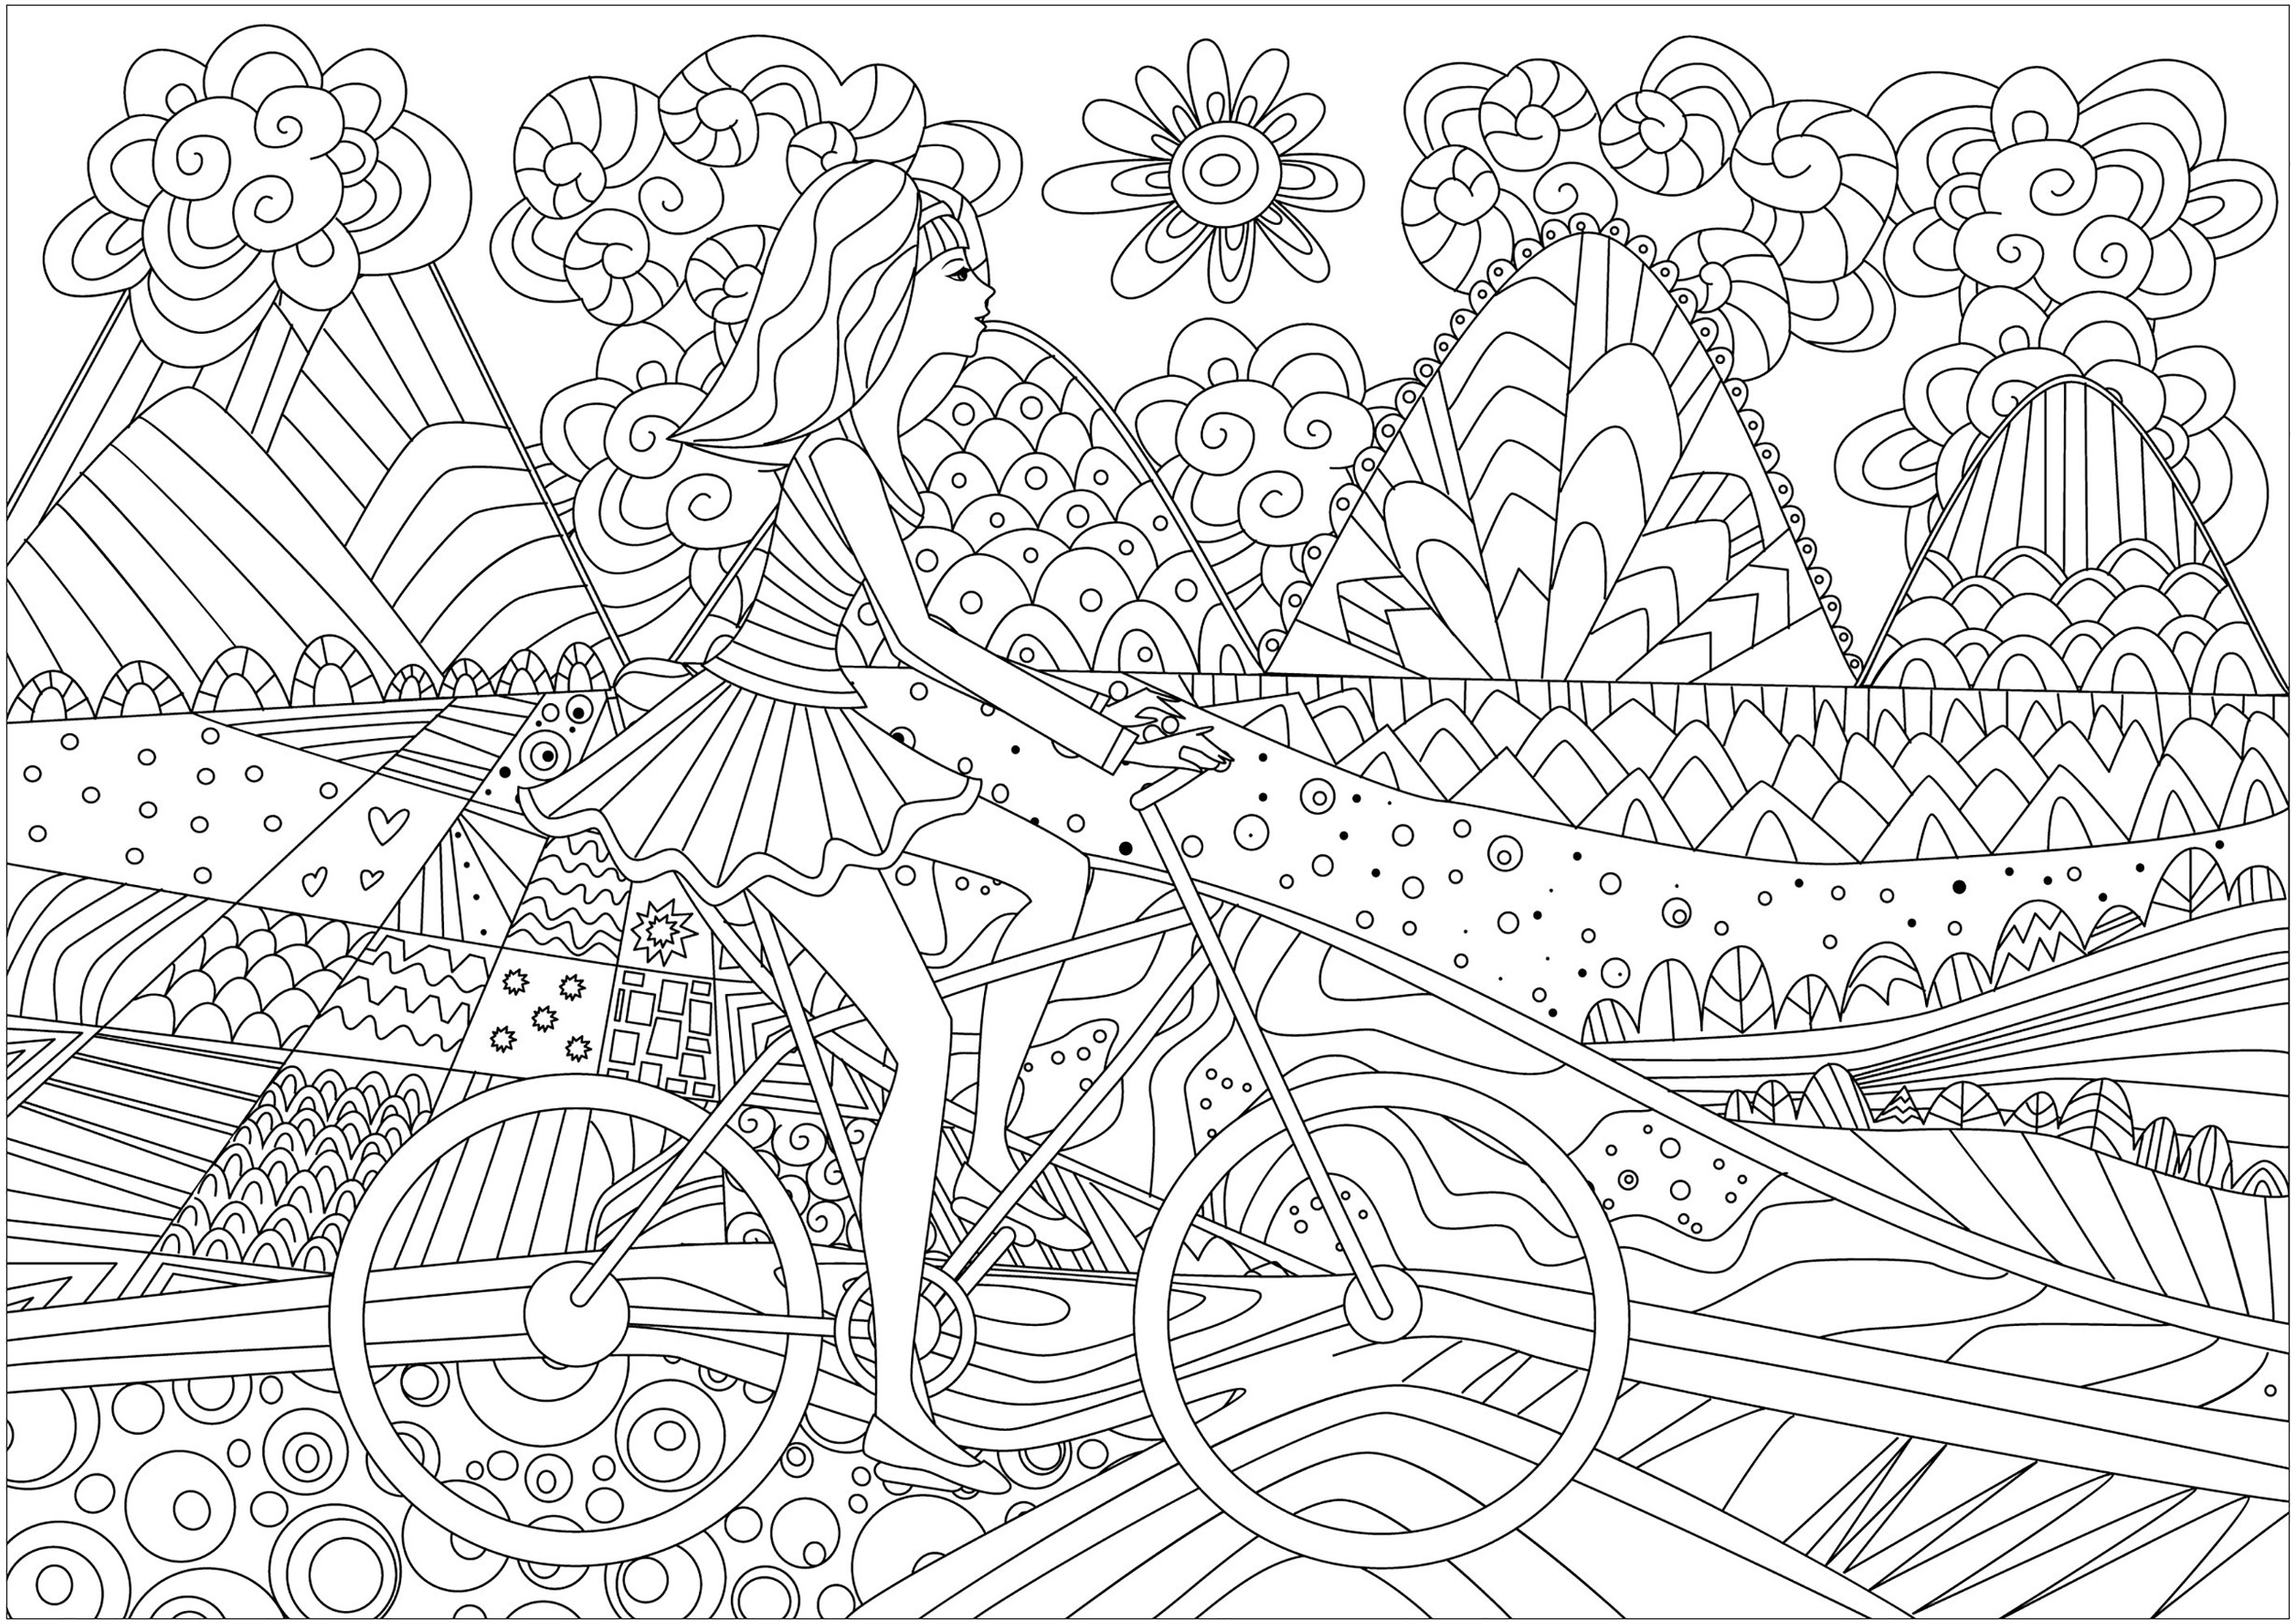 Woman   Coloring Pages for Adults